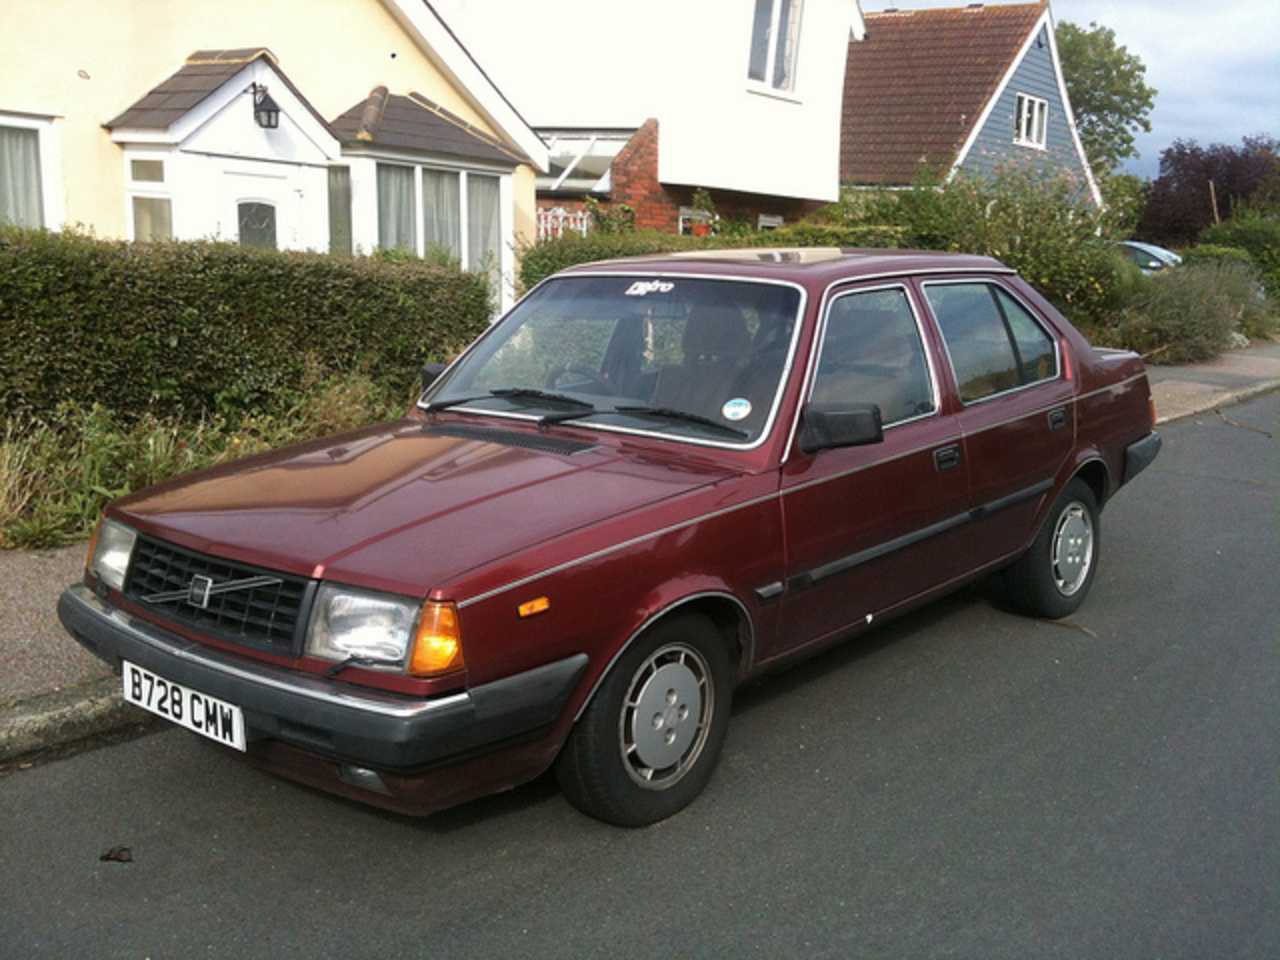 1984 Volvo 360 GLE Injection 4dr | Flickr - Photo Sharing!